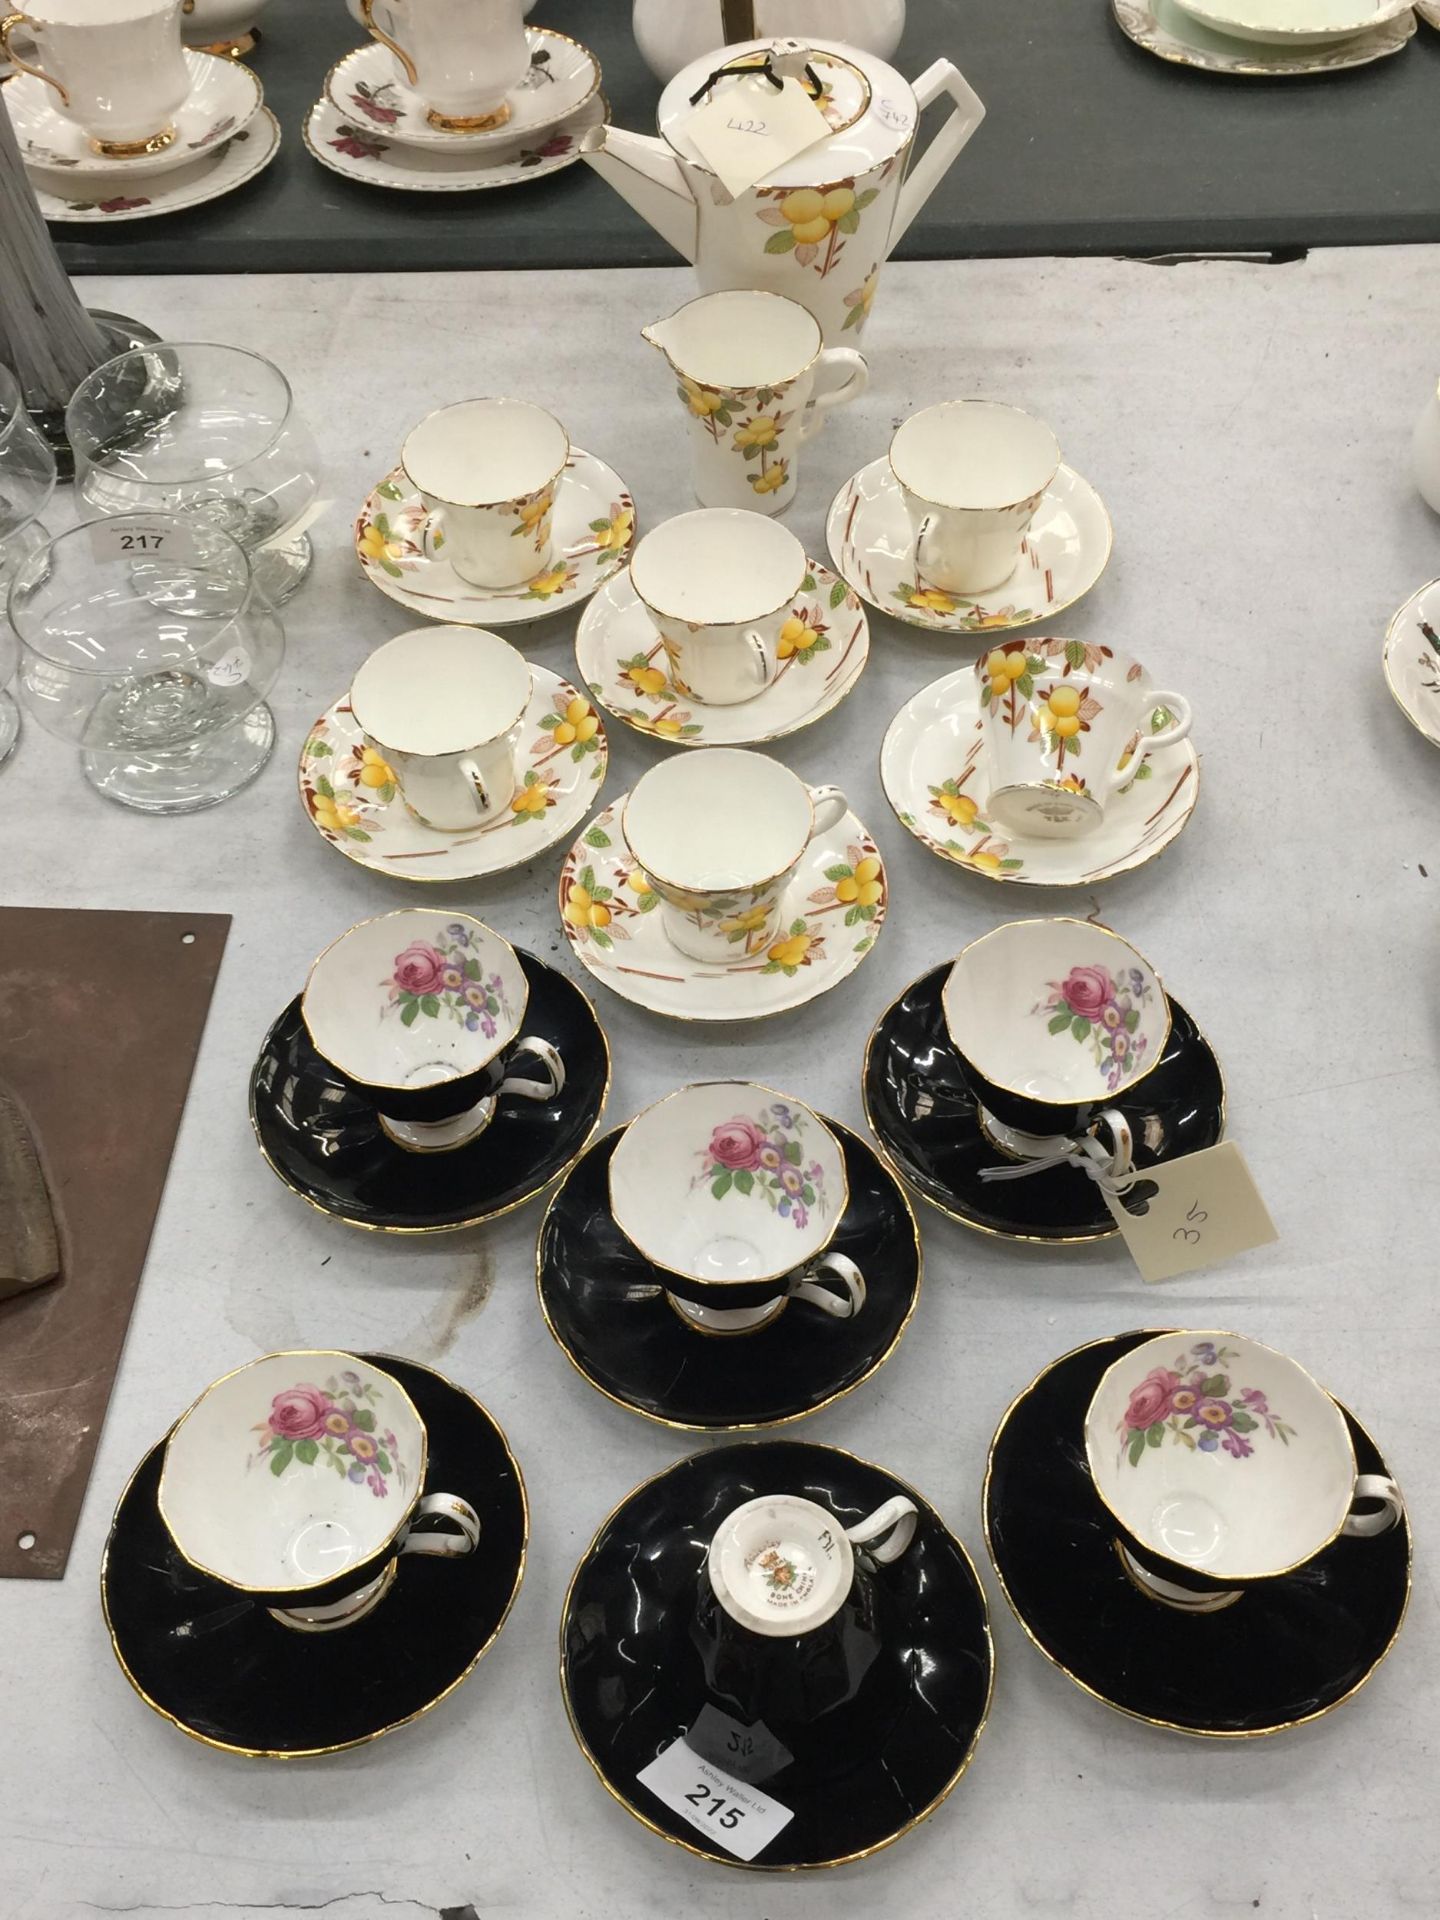 TWO VINTAGE PART TEASETS TO INCLUDE ADDERLEY FLORAL BLACK CUPS AND SAUCERS PLUS ART DECO STYLE